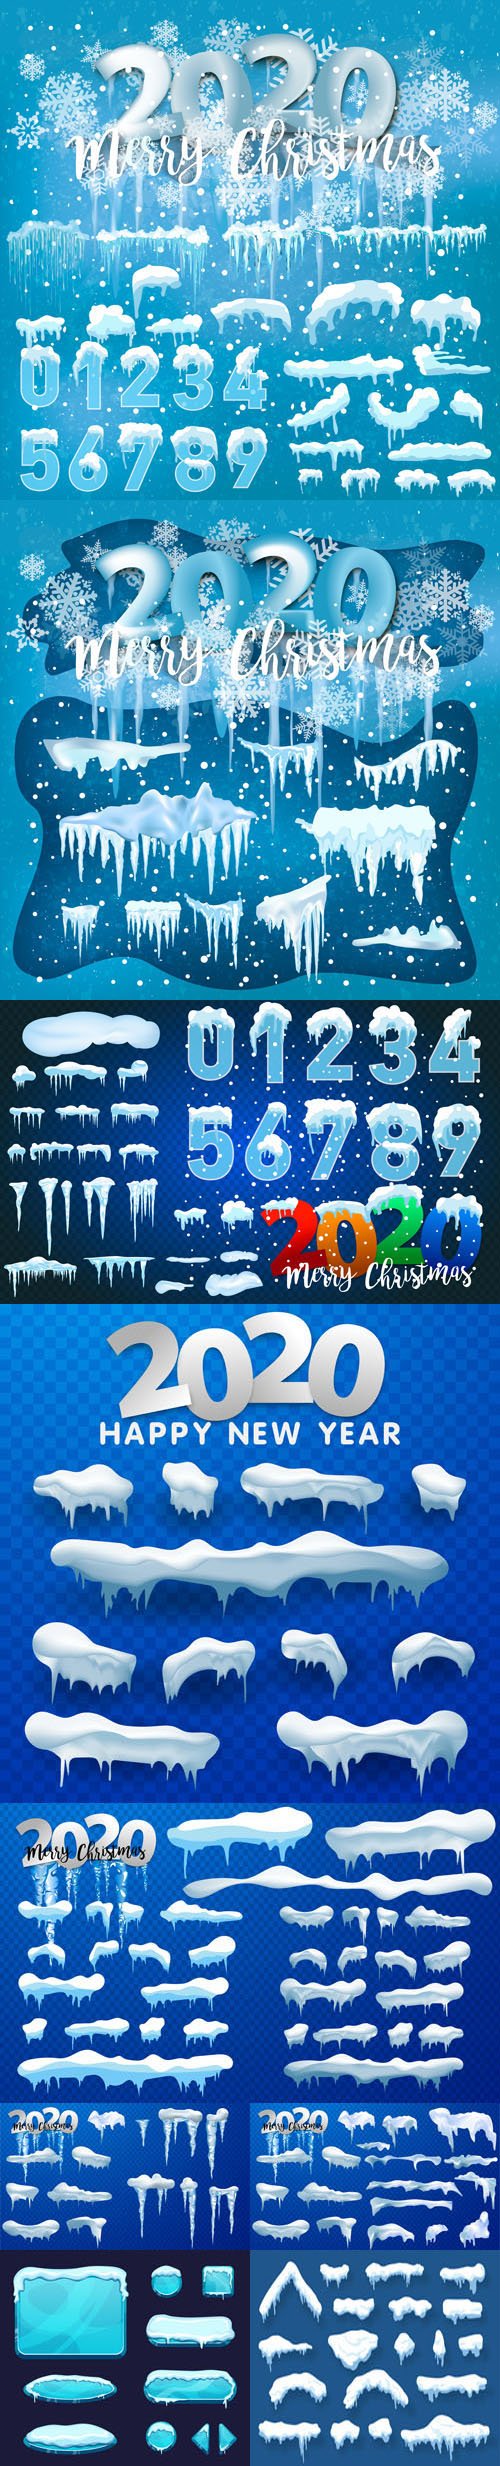 New Year 2020 Ice & Snow Vector Templates